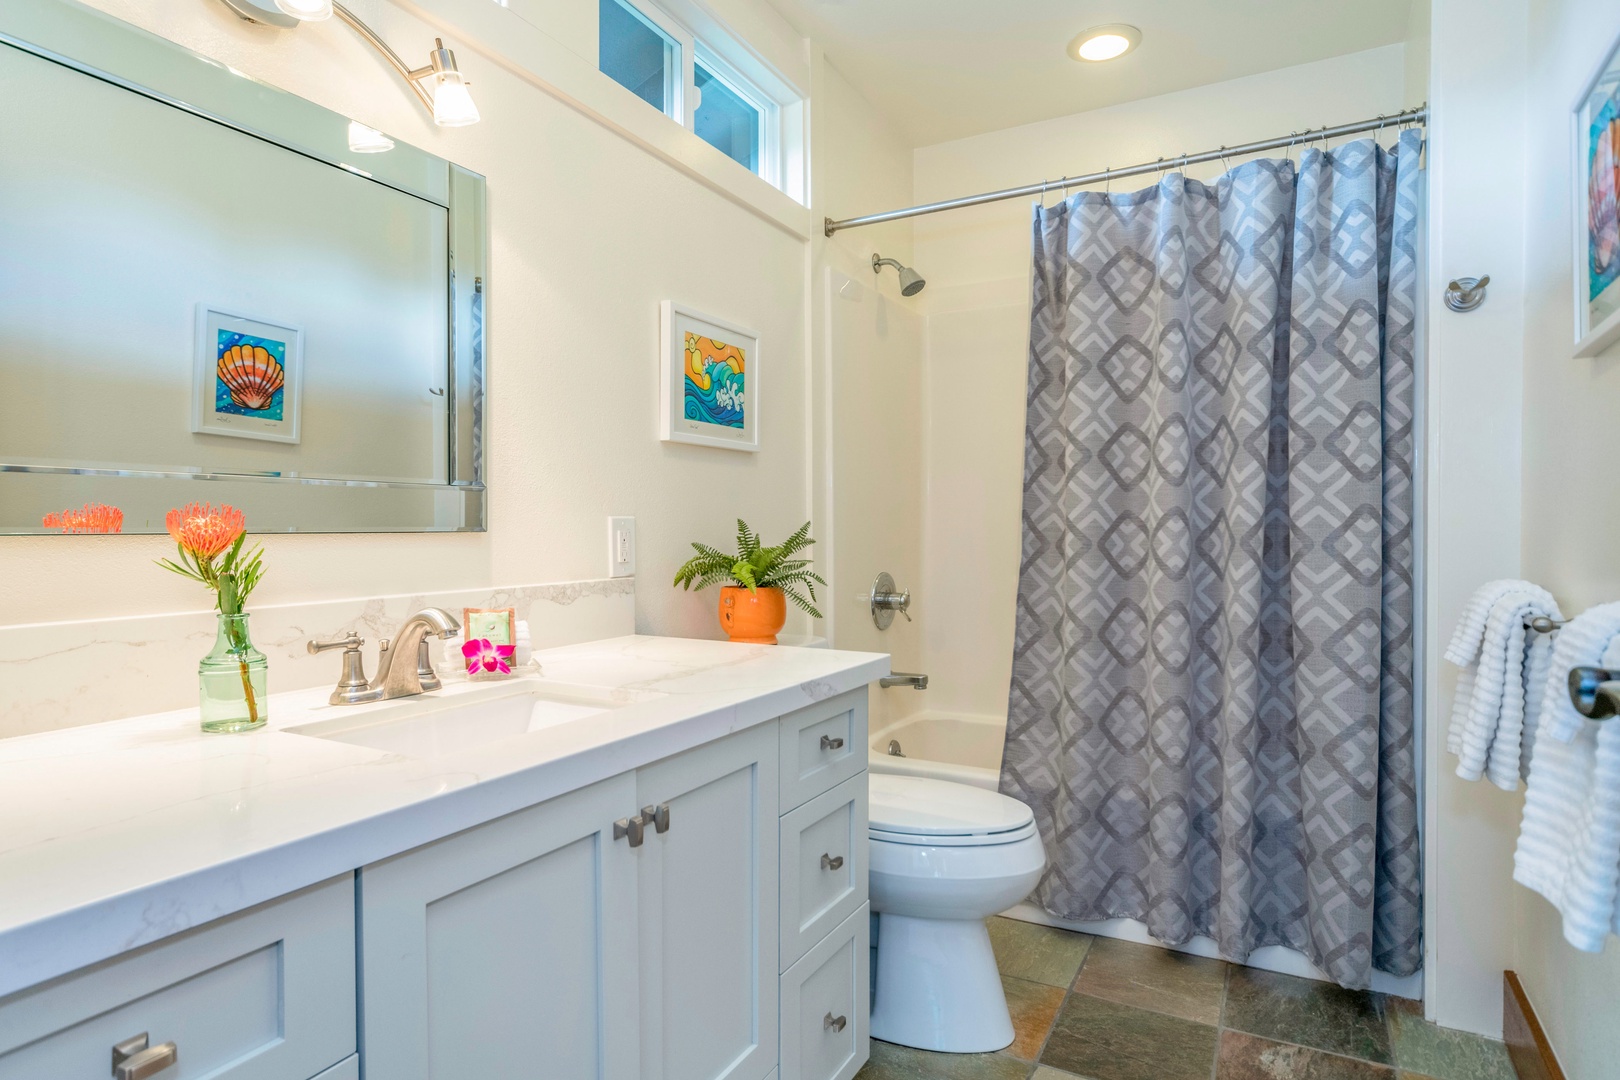 Honolulu Vacation Rentals, Hale Niuiki - The bunk bed room's attached bathroom